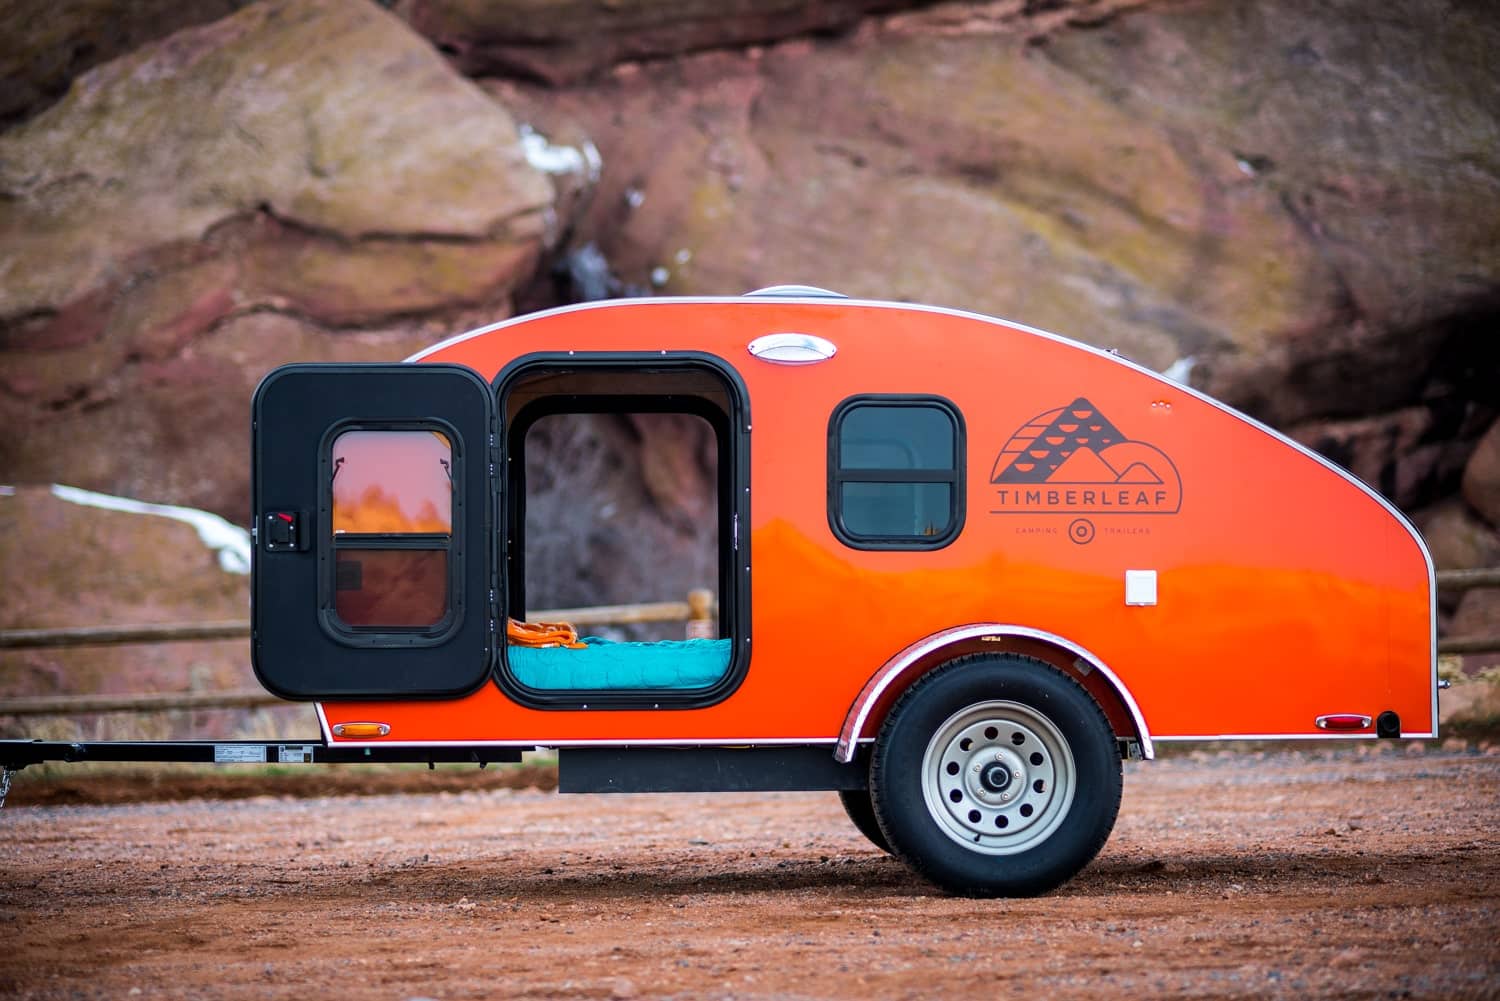 ultra-lightweight travel trailers under 2,000 pounds